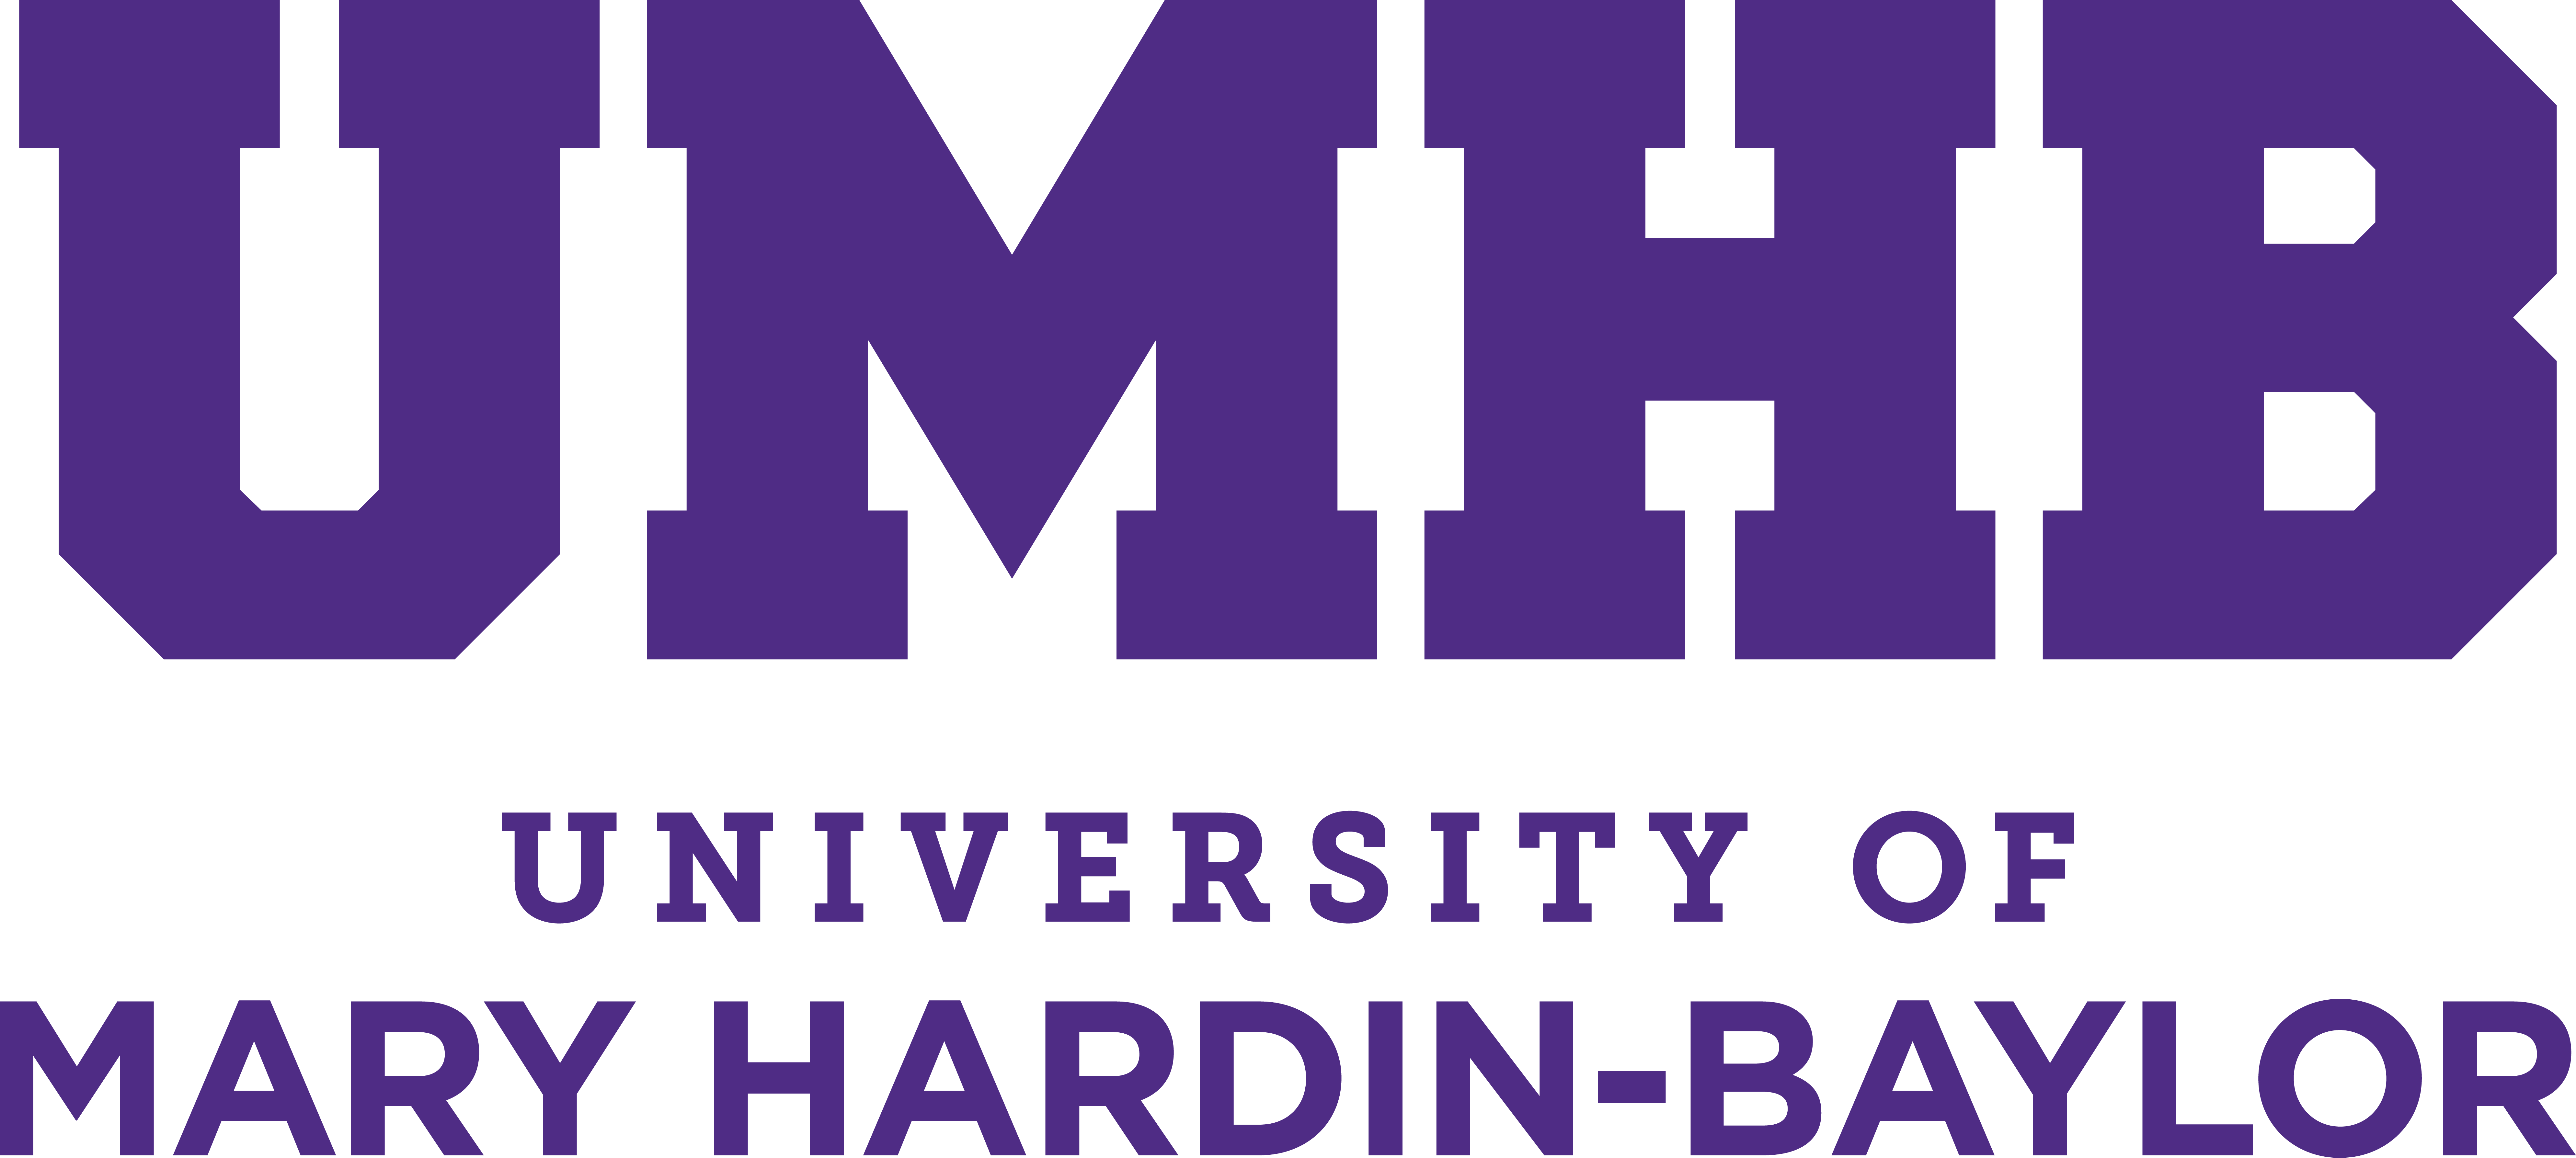 Stacked UMHB logo - color purple